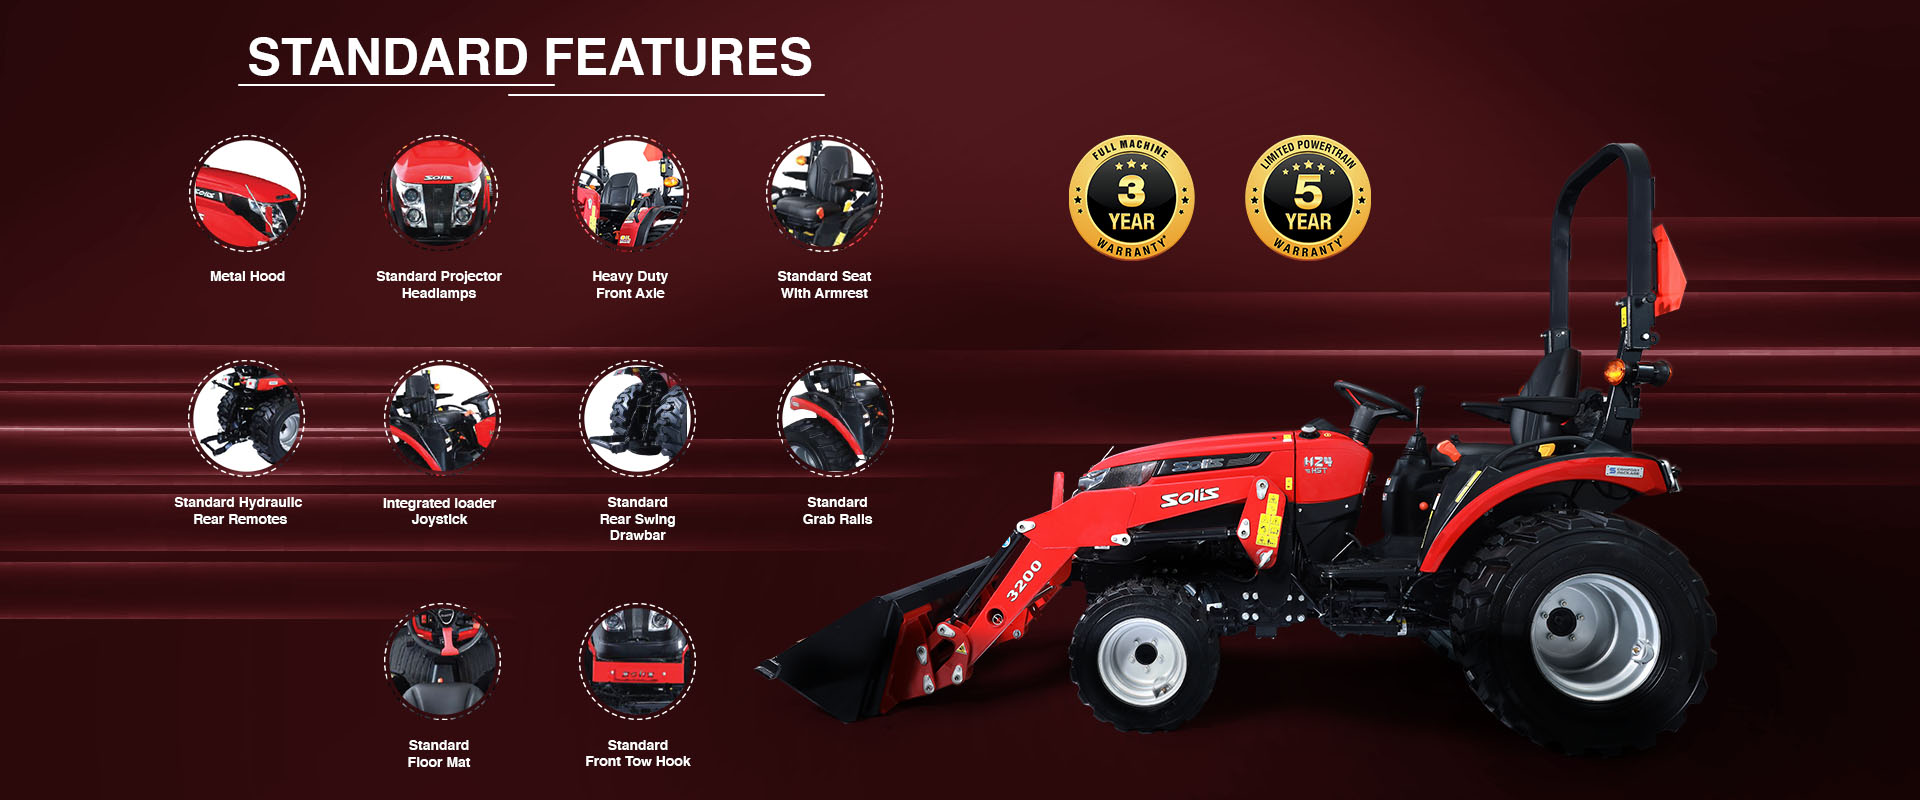 Solis H24 Compact Tractor Features - Metal Hood, Standard Projector Headlamps, Heavy Duty Front Axle, Standard Seat with Armest, Standard Hydraualic Rear Remotes, Integrated Loader Joystick and more